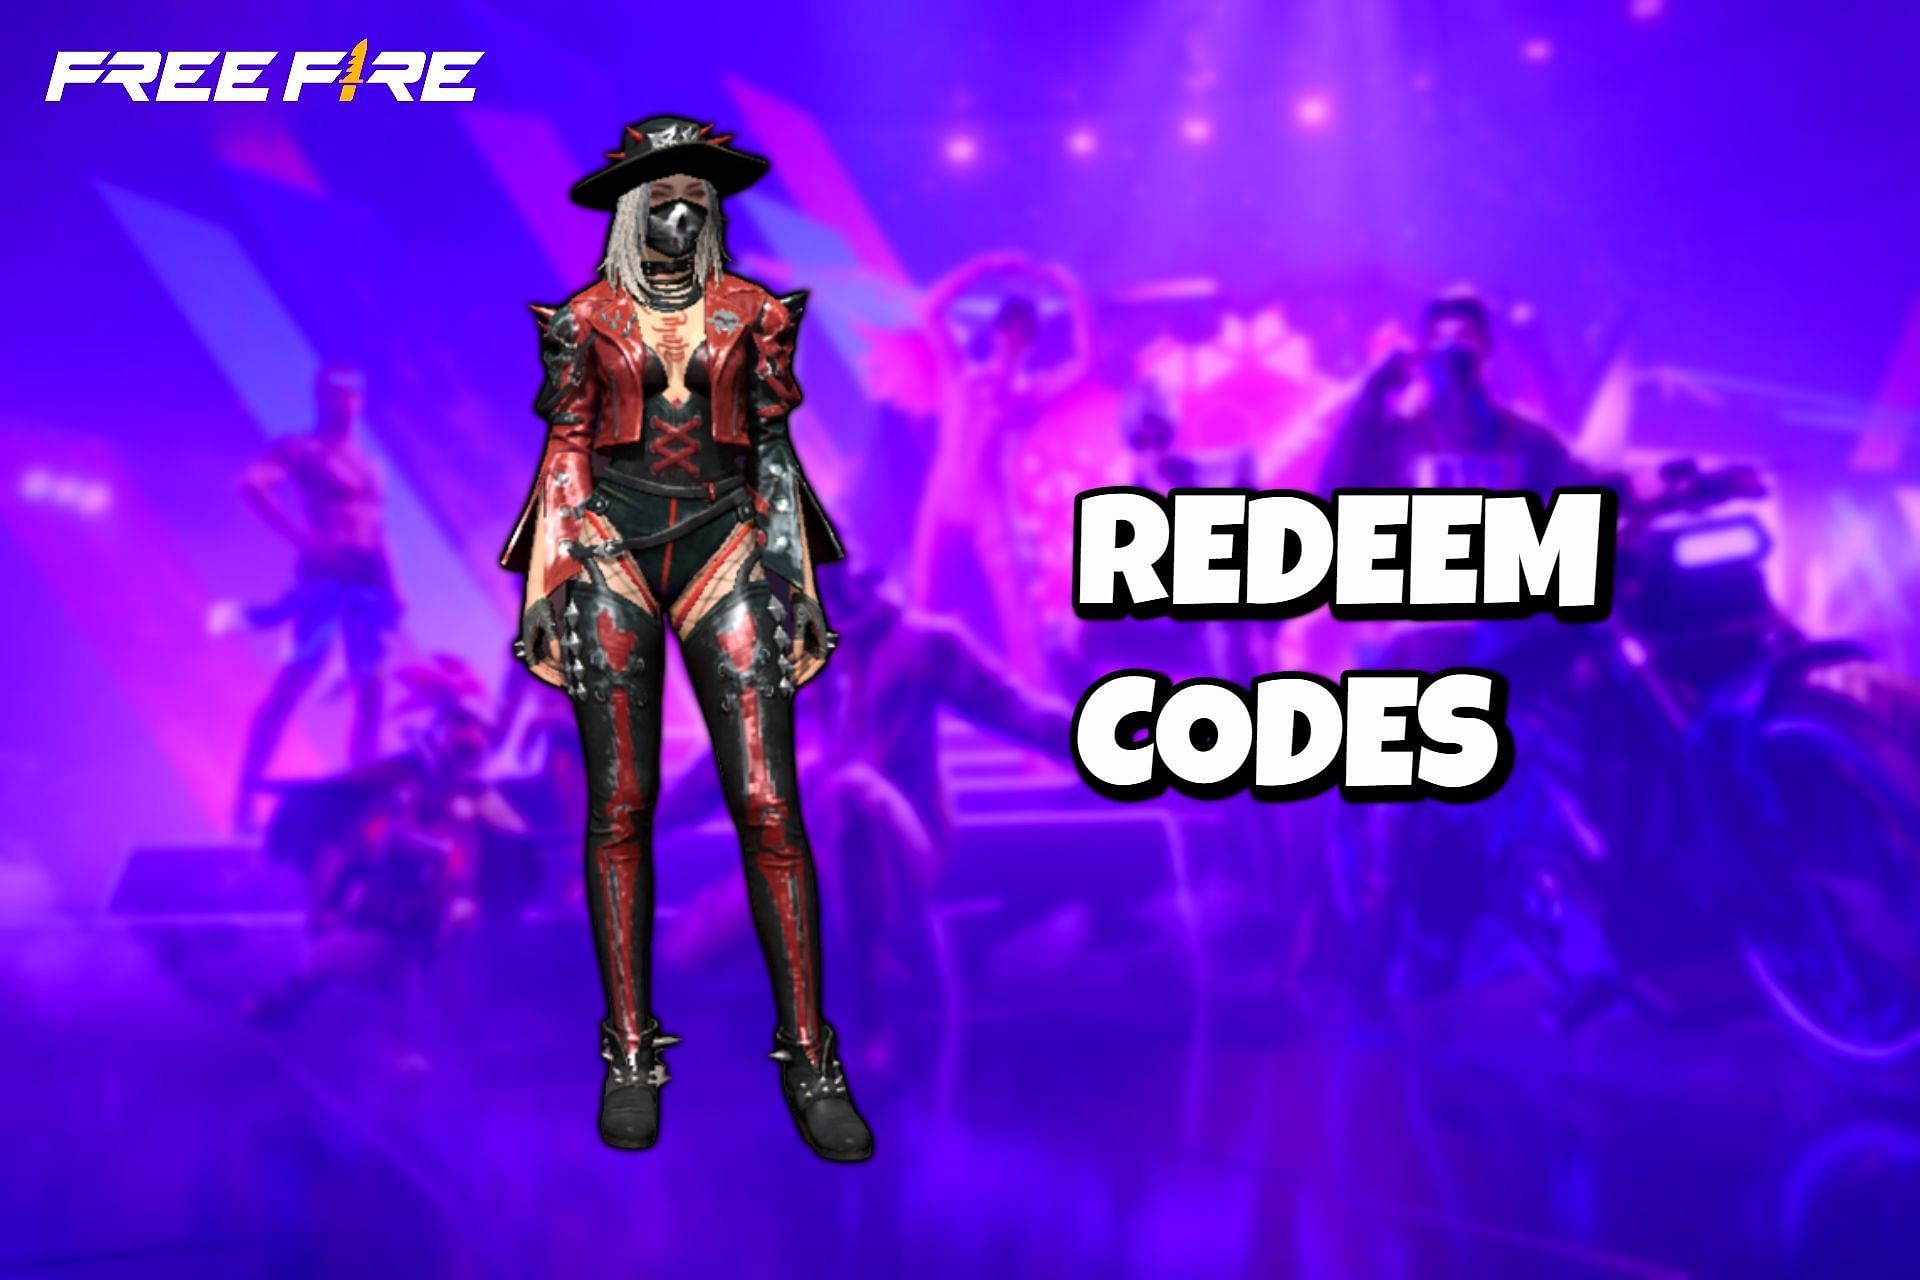 Players can make use of the redeem codes to earn free rewards in the game (Image via Sportskeeda)